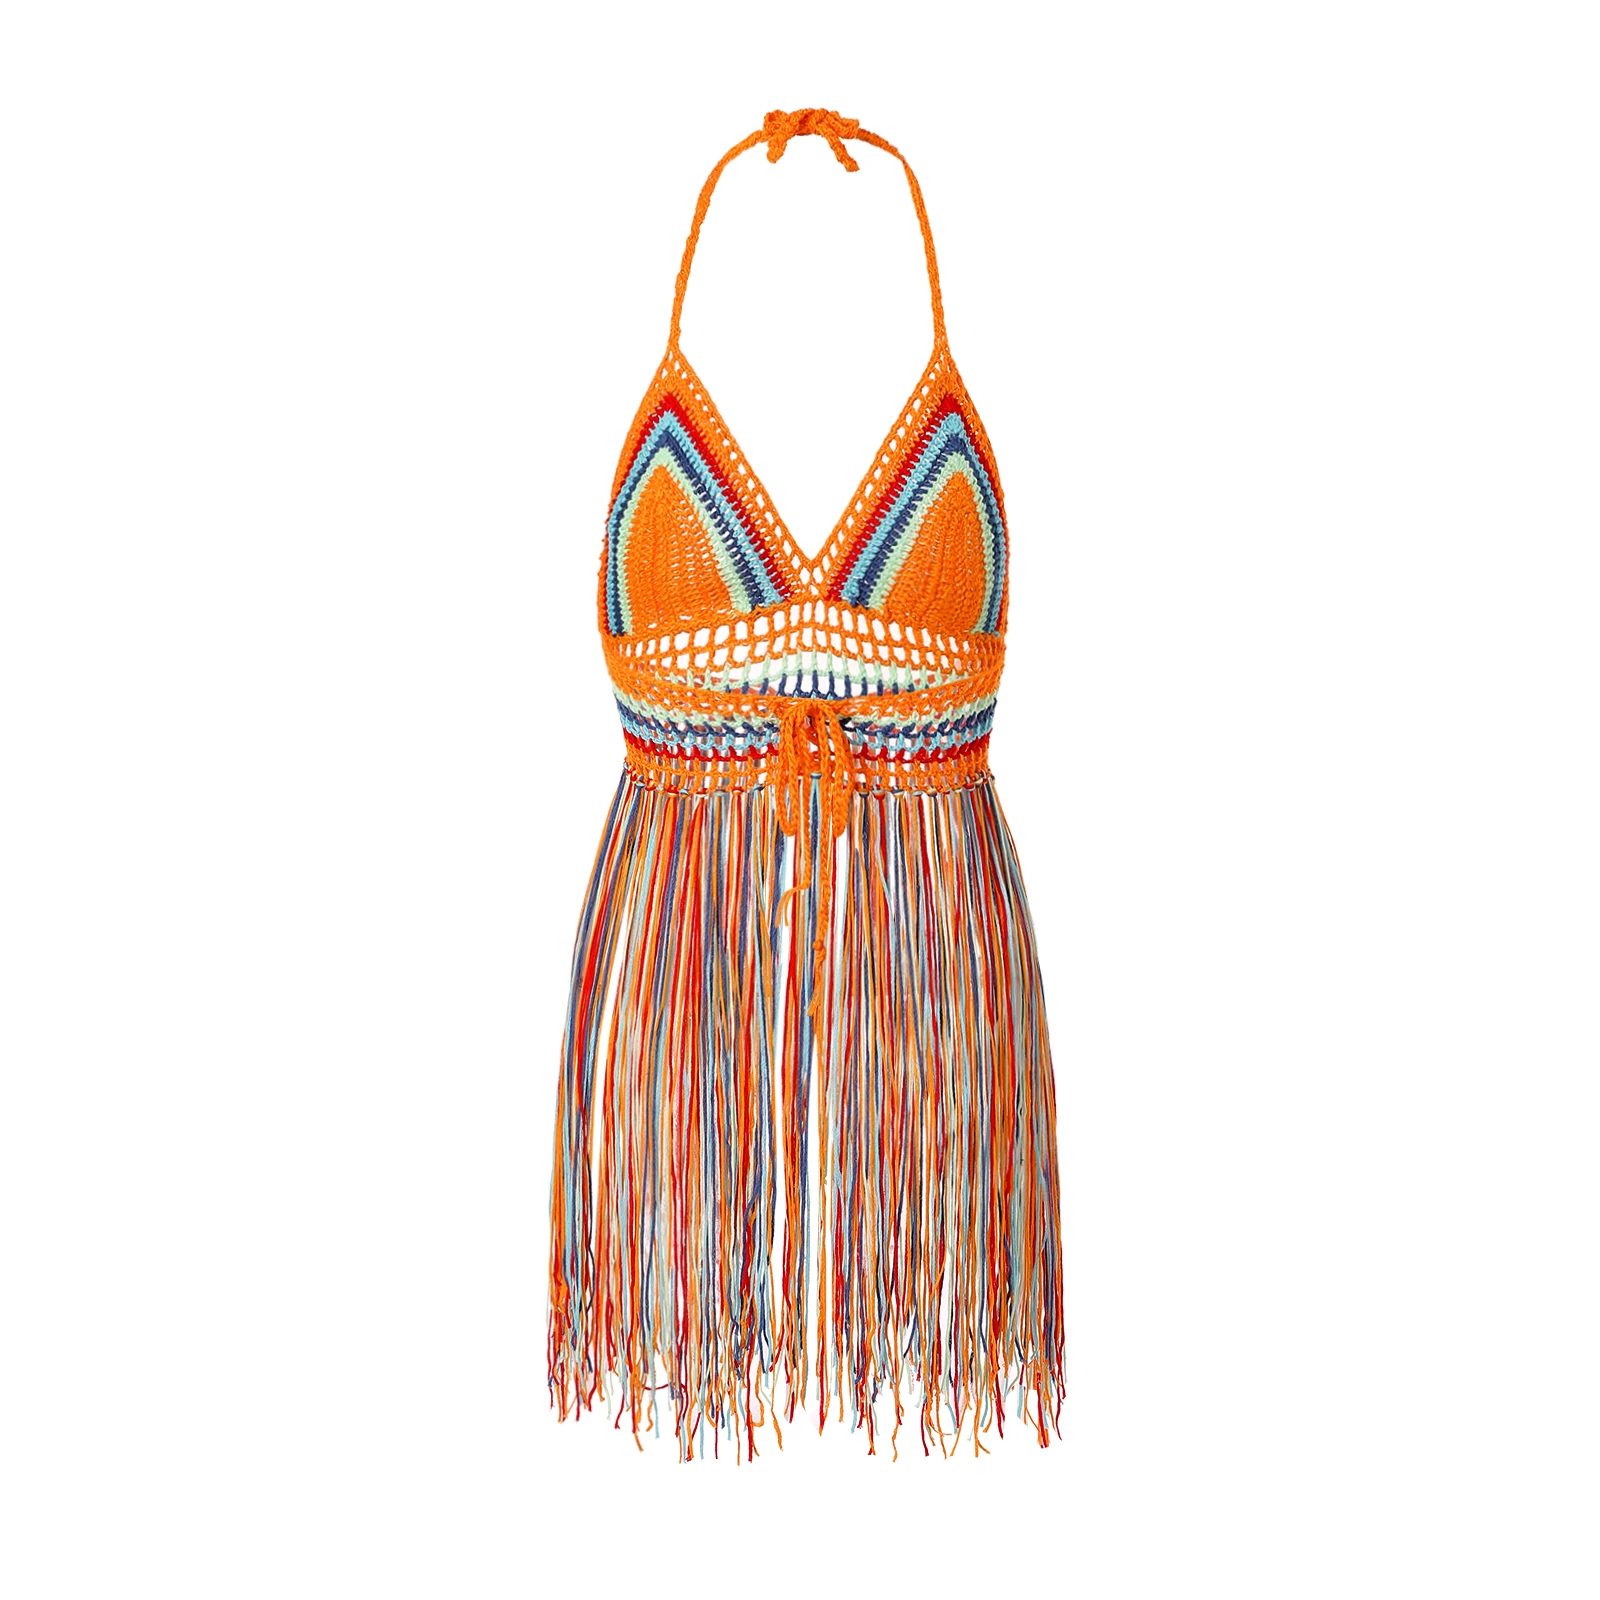 Women's Summer Bikini Cover Up Sleeveless Backless Hanging Neck Colorful Knit Tassel Beachwear Hollow Out Dress bikini and cover up set